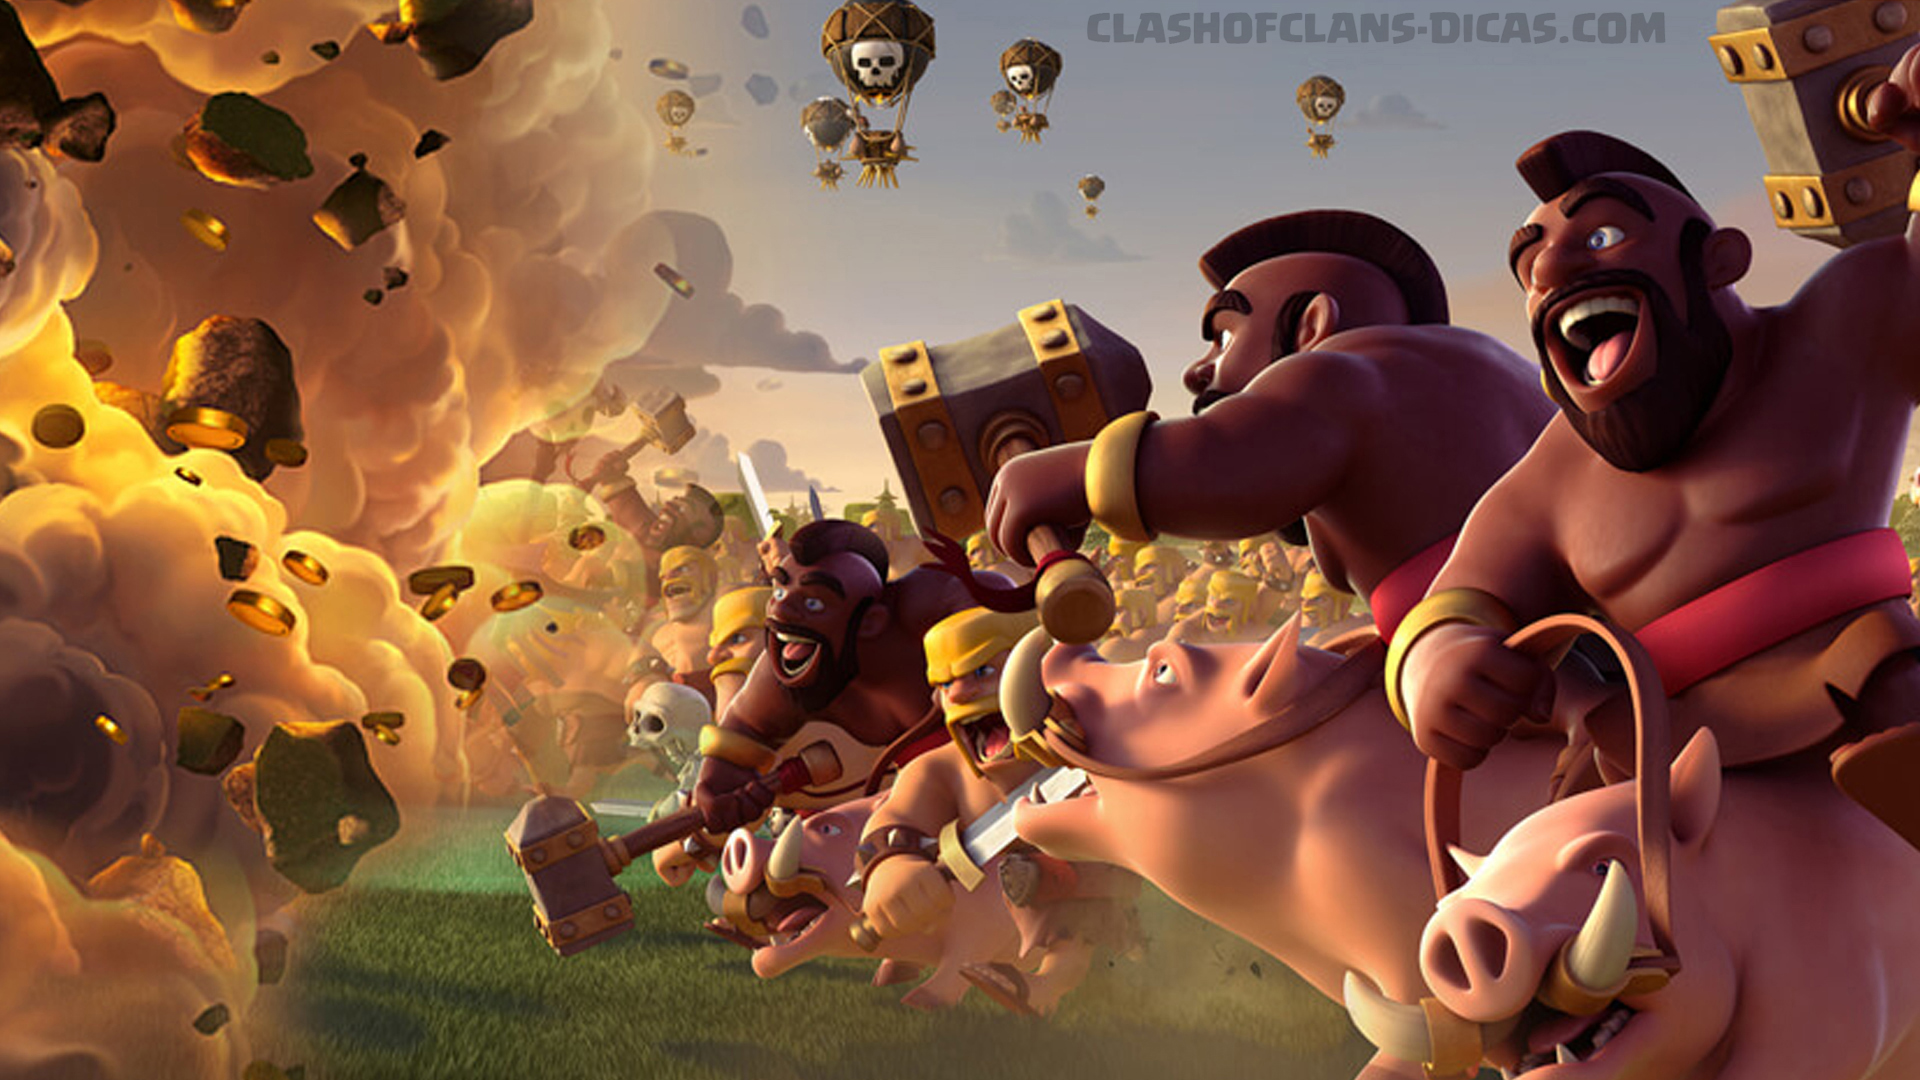 Clash Of Clans Wallpapers Wallpaper - Clash Of Clans Hog Rider 360 - HD Wallpaper 